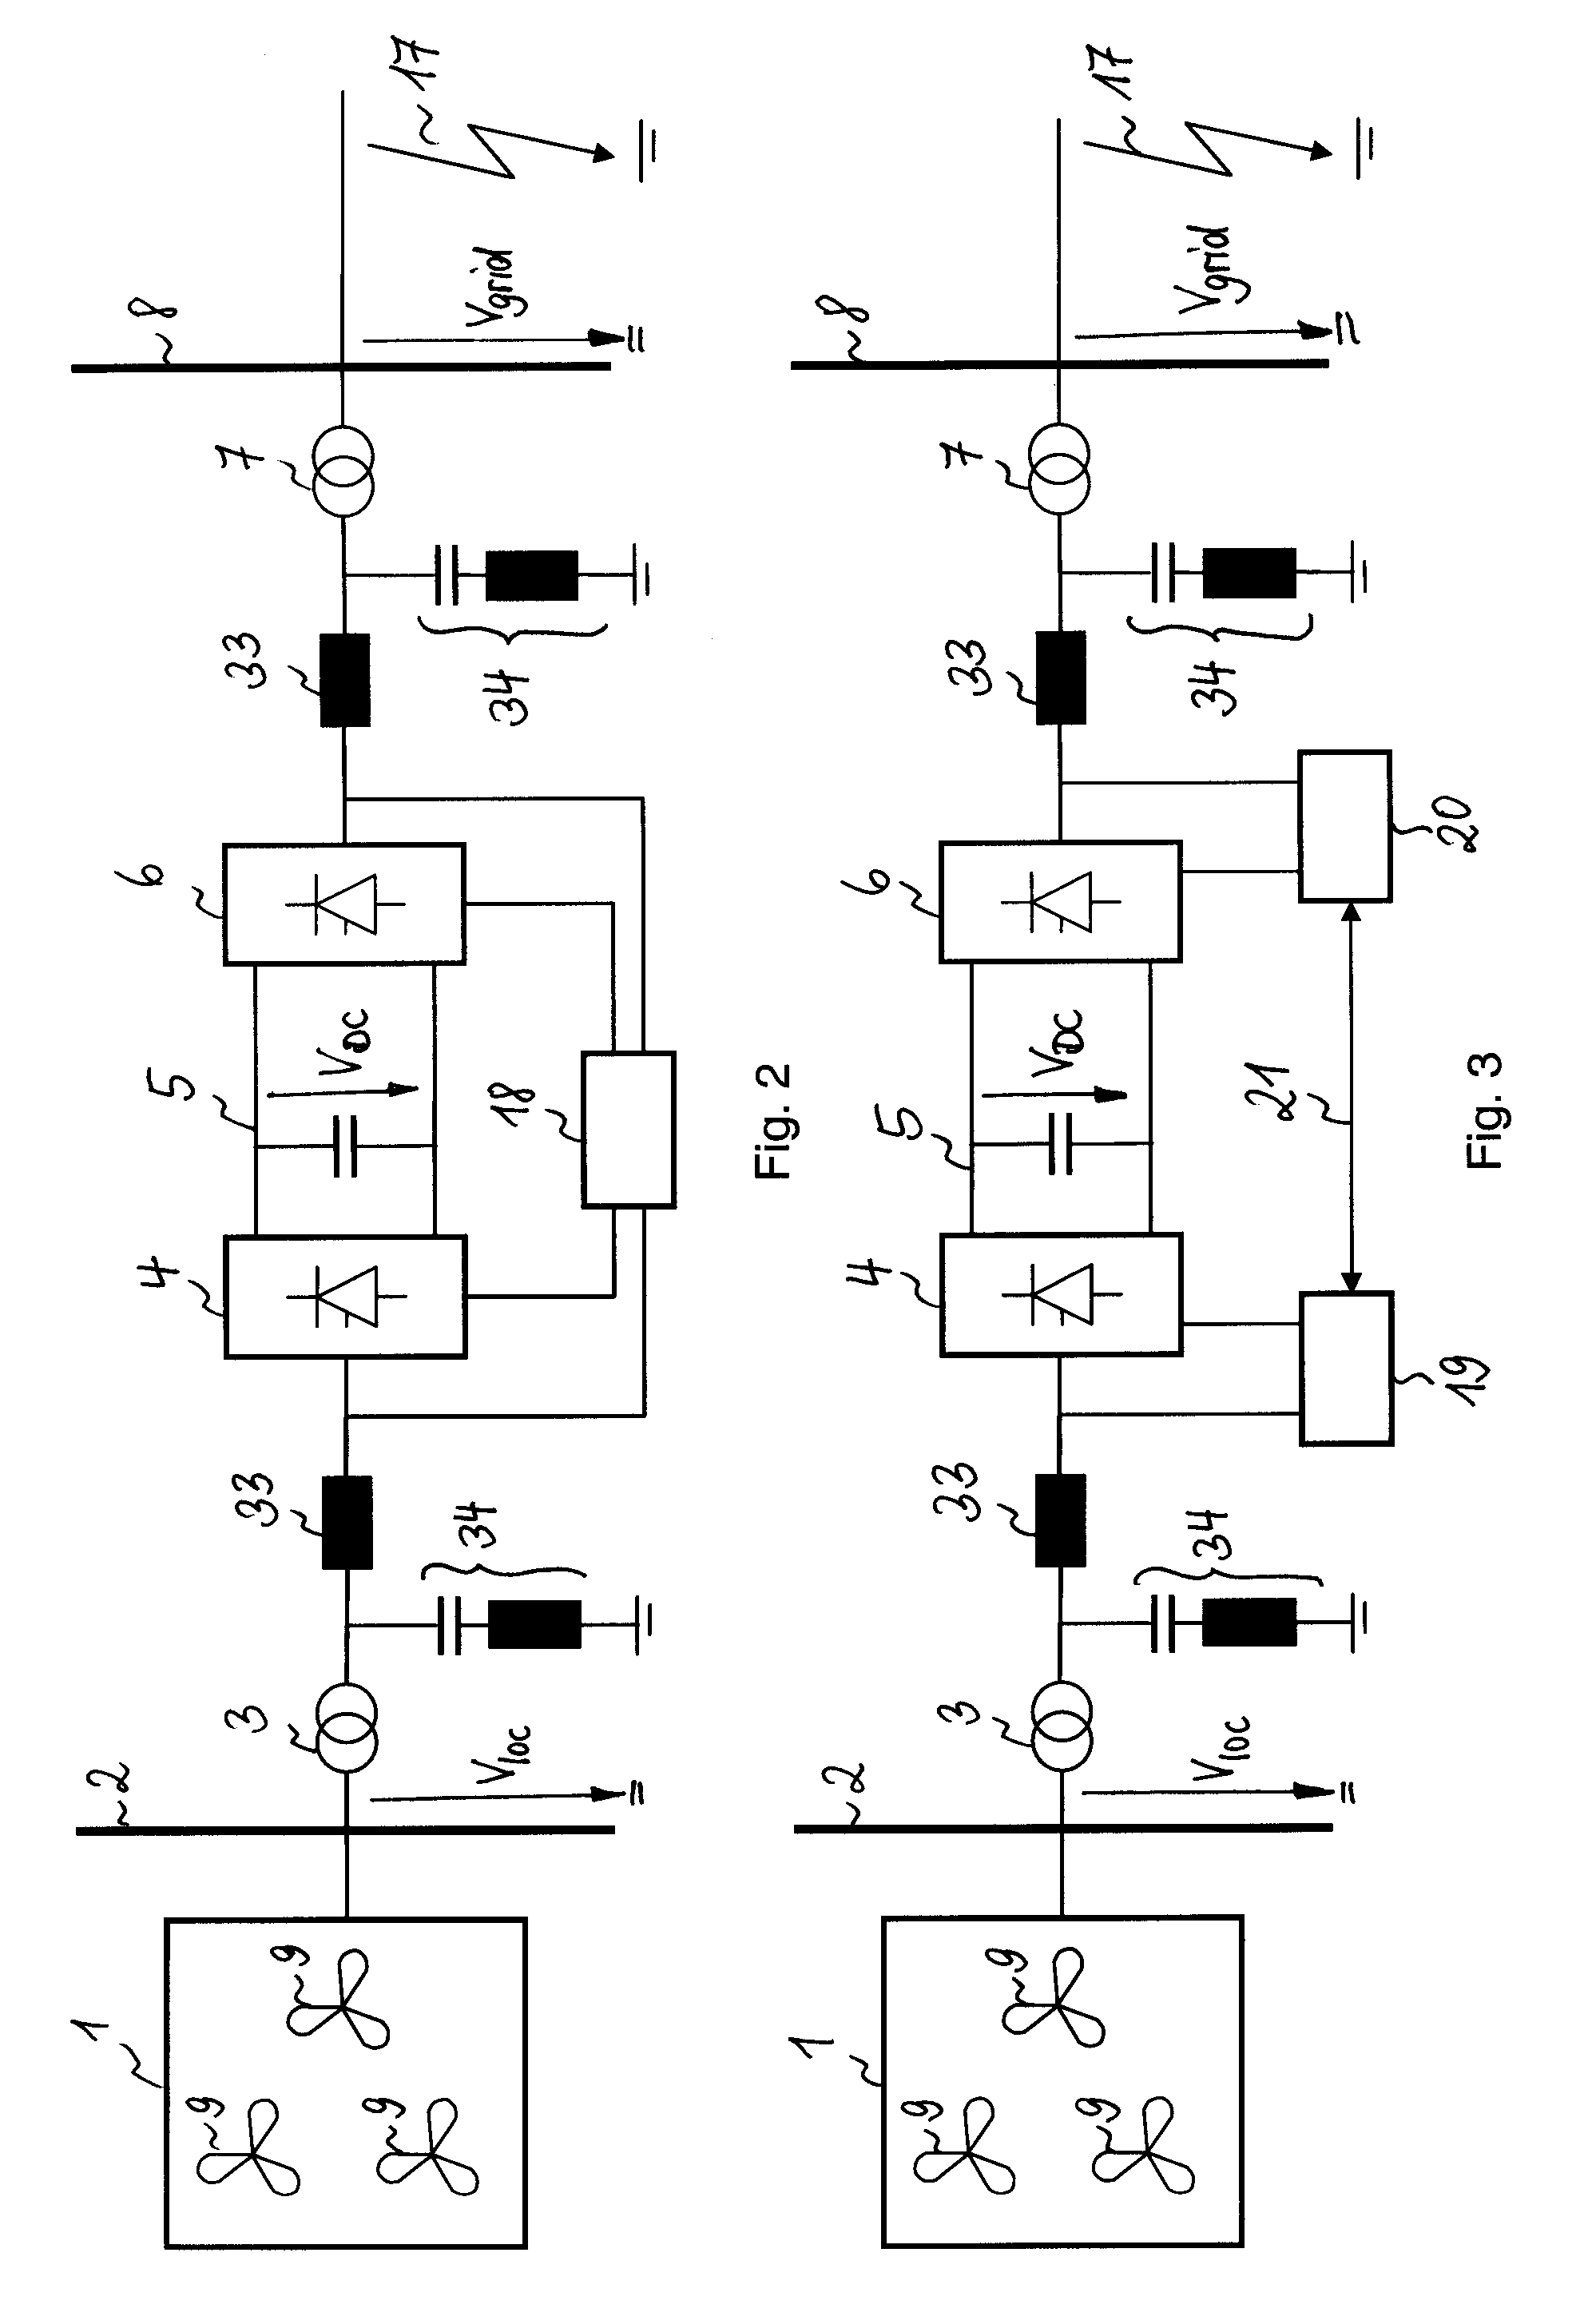 Method and system to influence the power generation of an adjustable speed generator